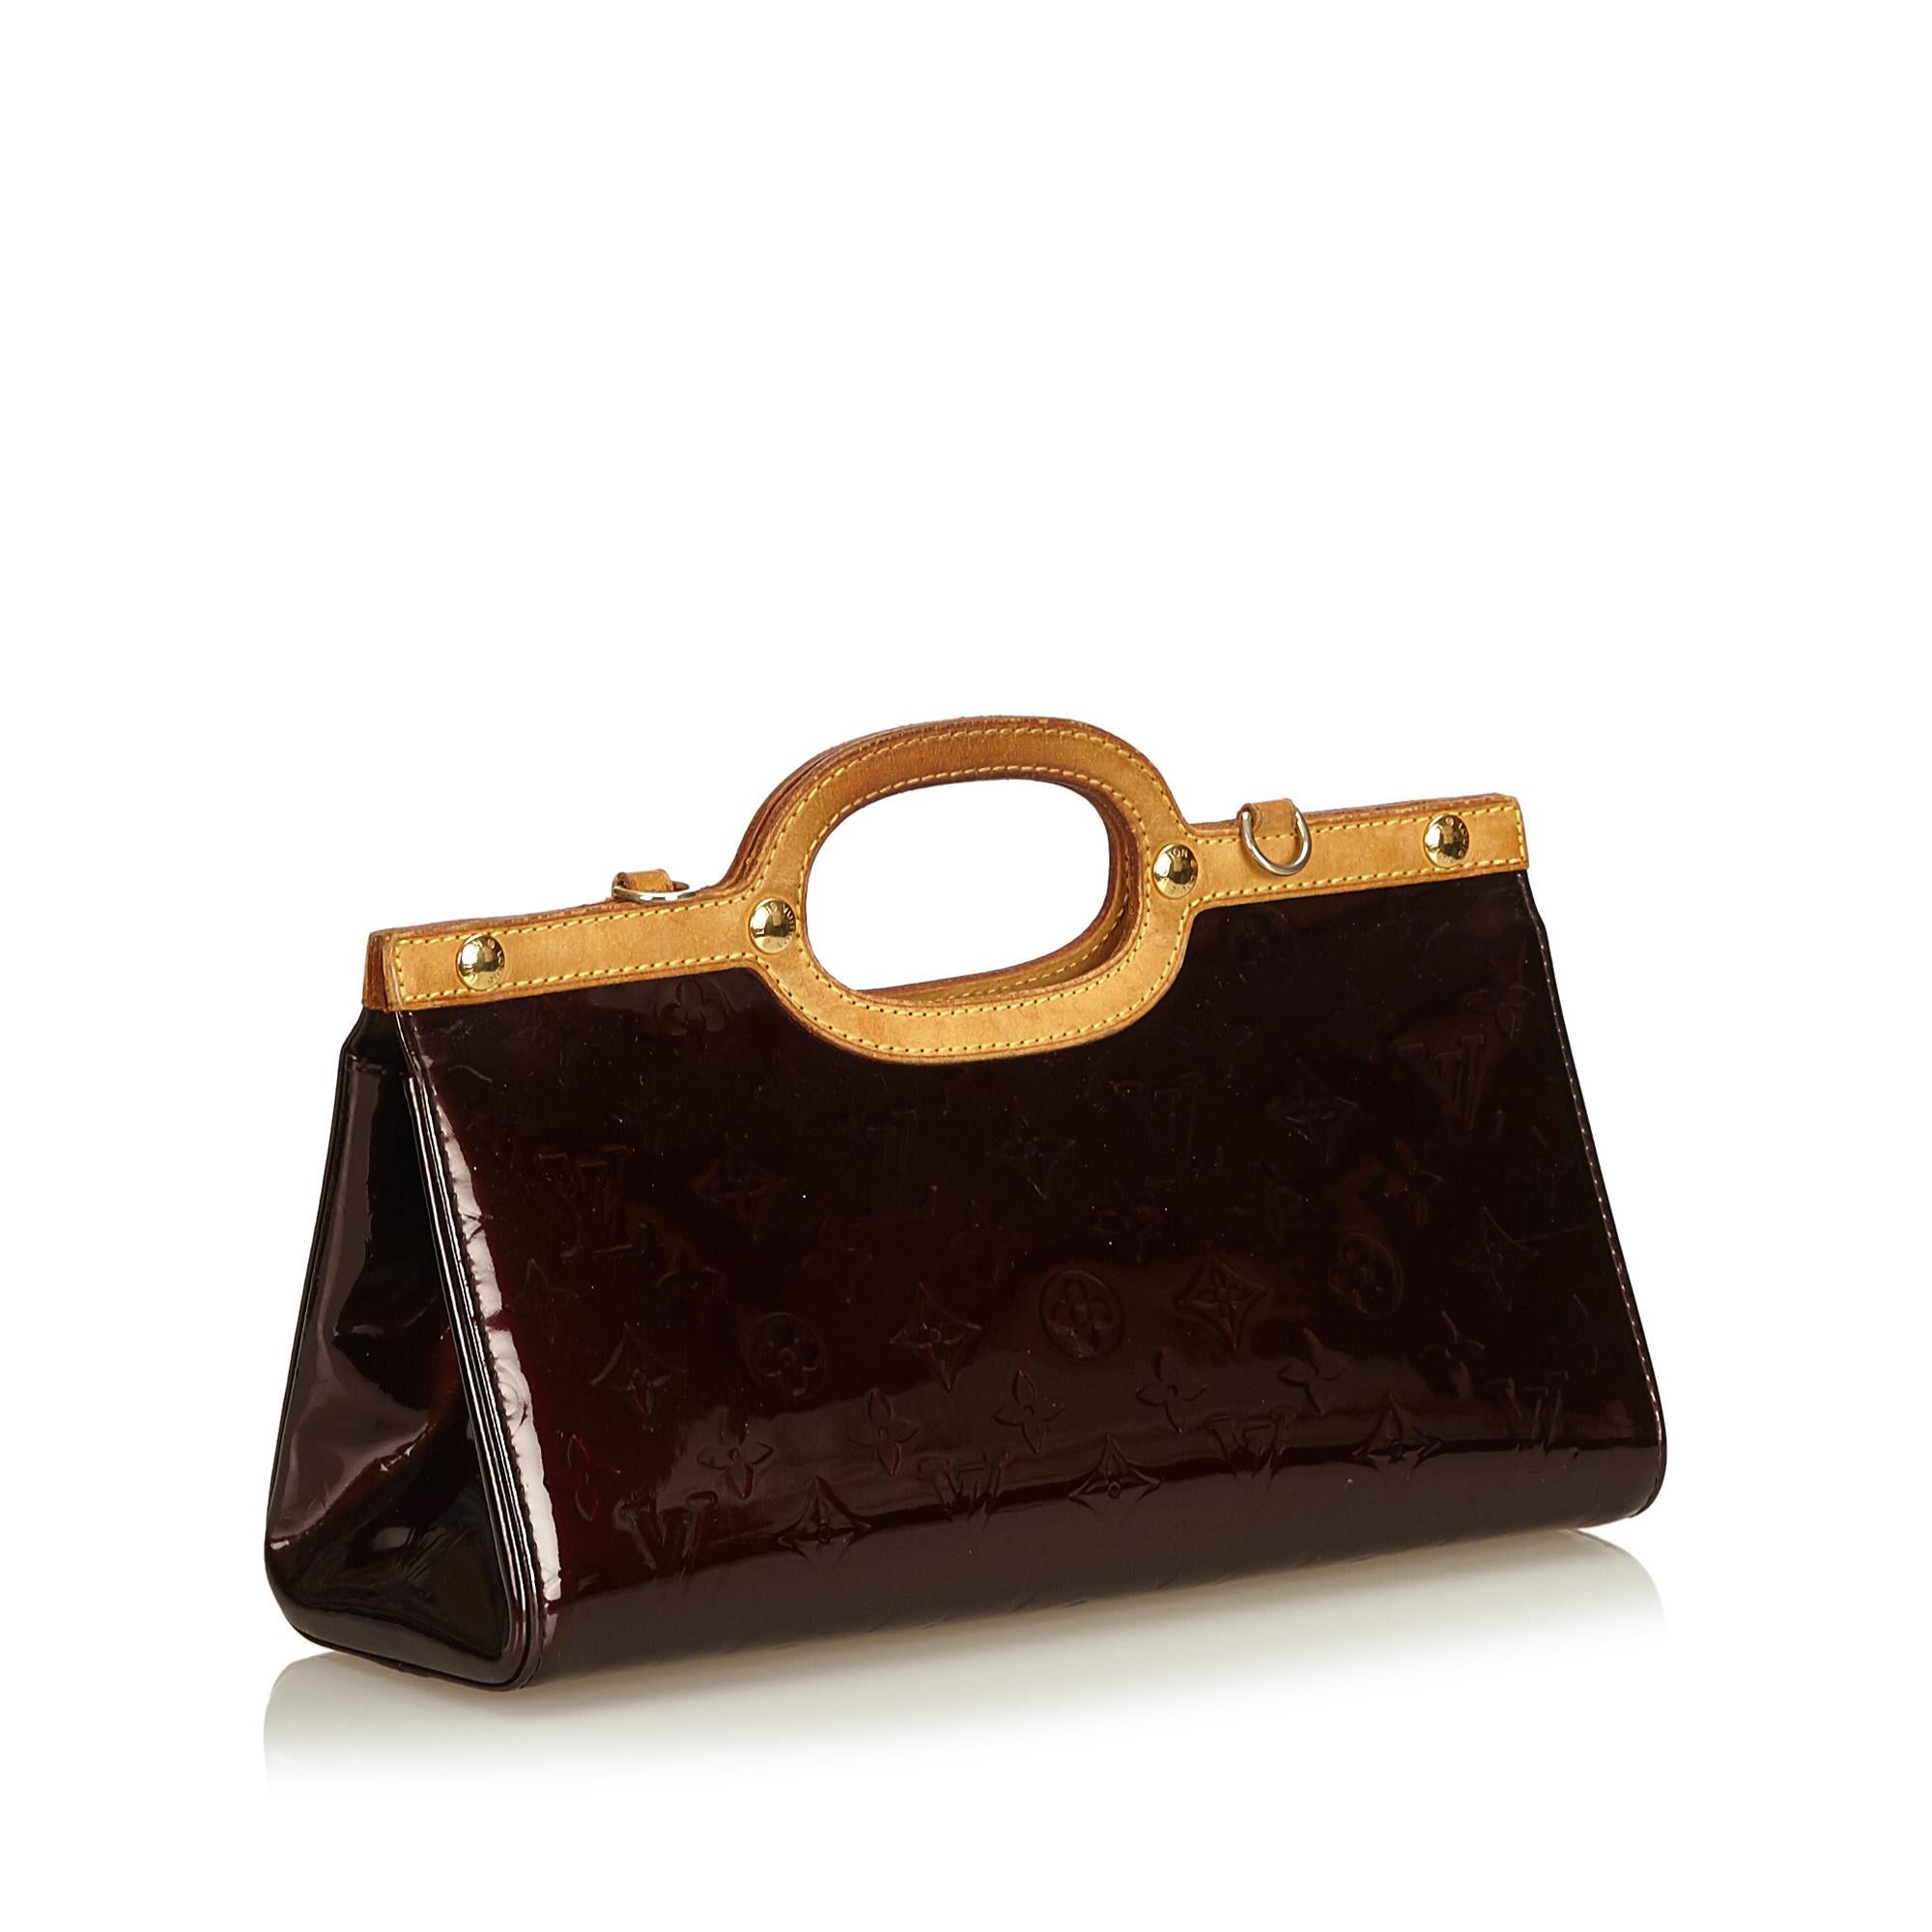 The Roxbury Drive features a vernis leather body, a leather top and an detachable shoulder strap, an open top, and an interior slip pocket.

It carries a B+ condition rating.

Dimensions: 
Length 17.00 cm
Width 31.00 cm
Depth 10.00 cm
Shoulder Drop